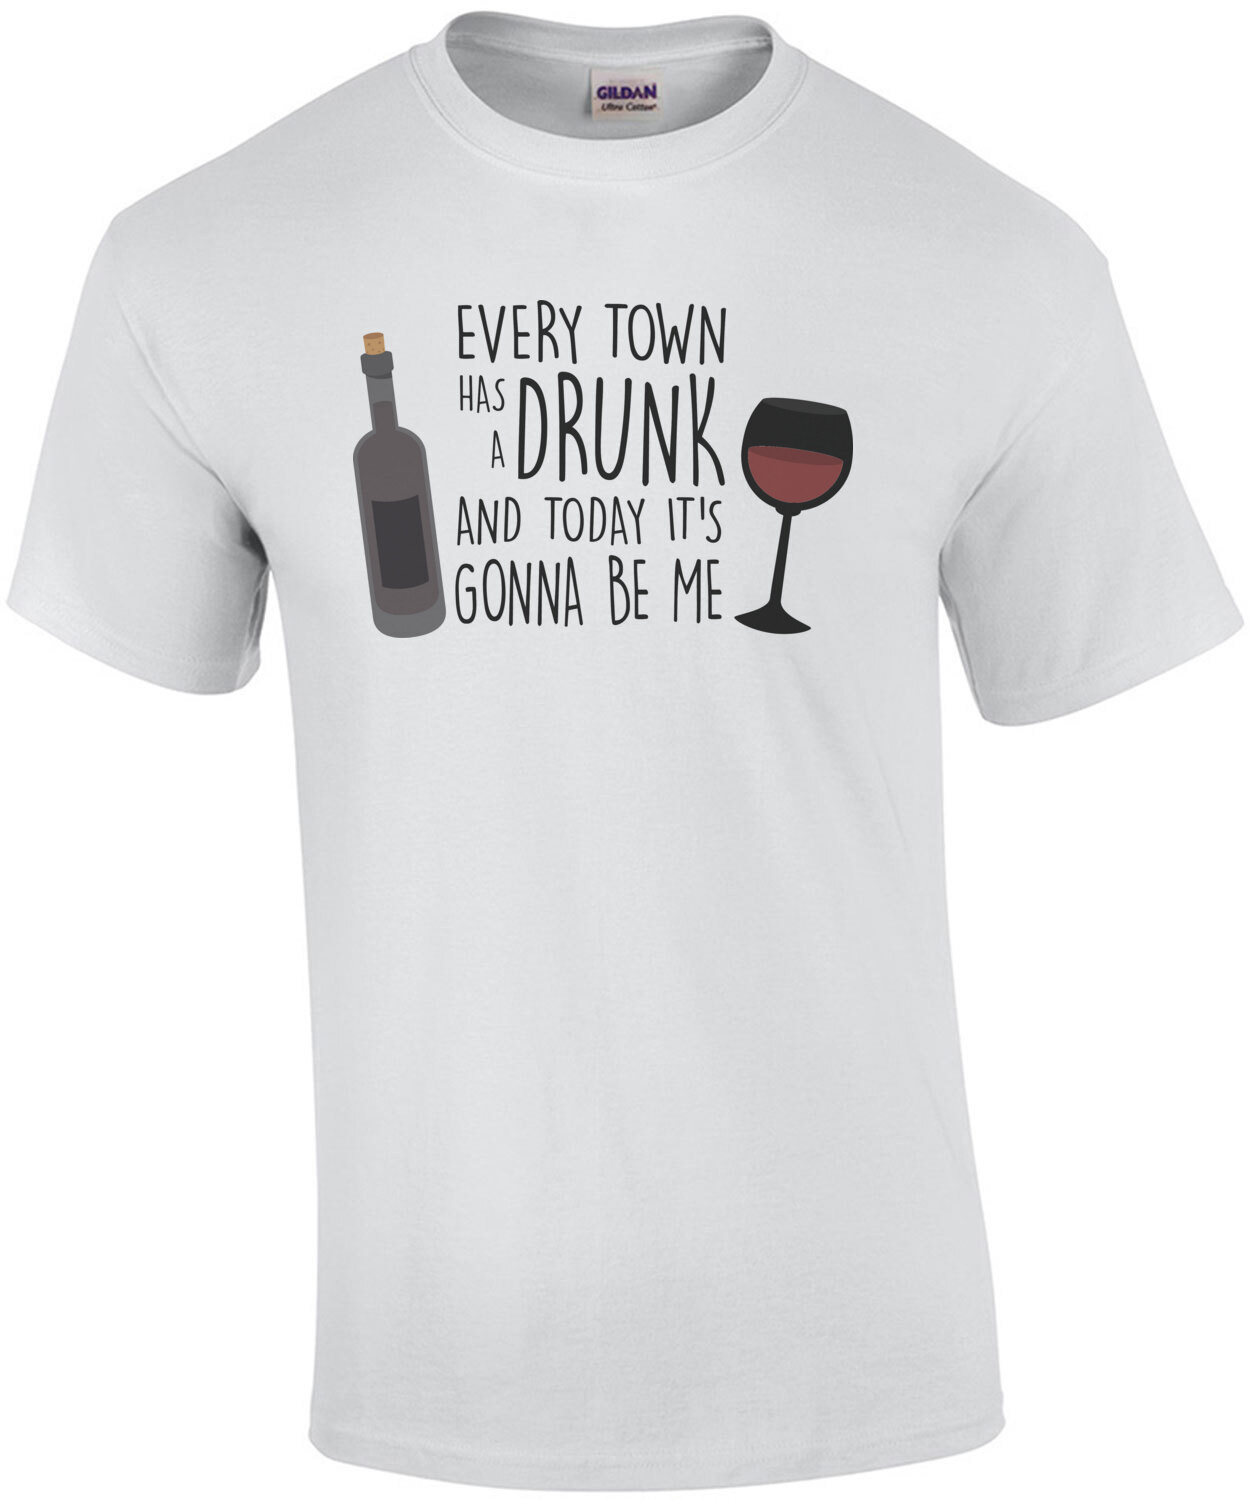 Every Town Has a Drunk And Today It's Gonna Be Me - Wine Drinking T-Shirt